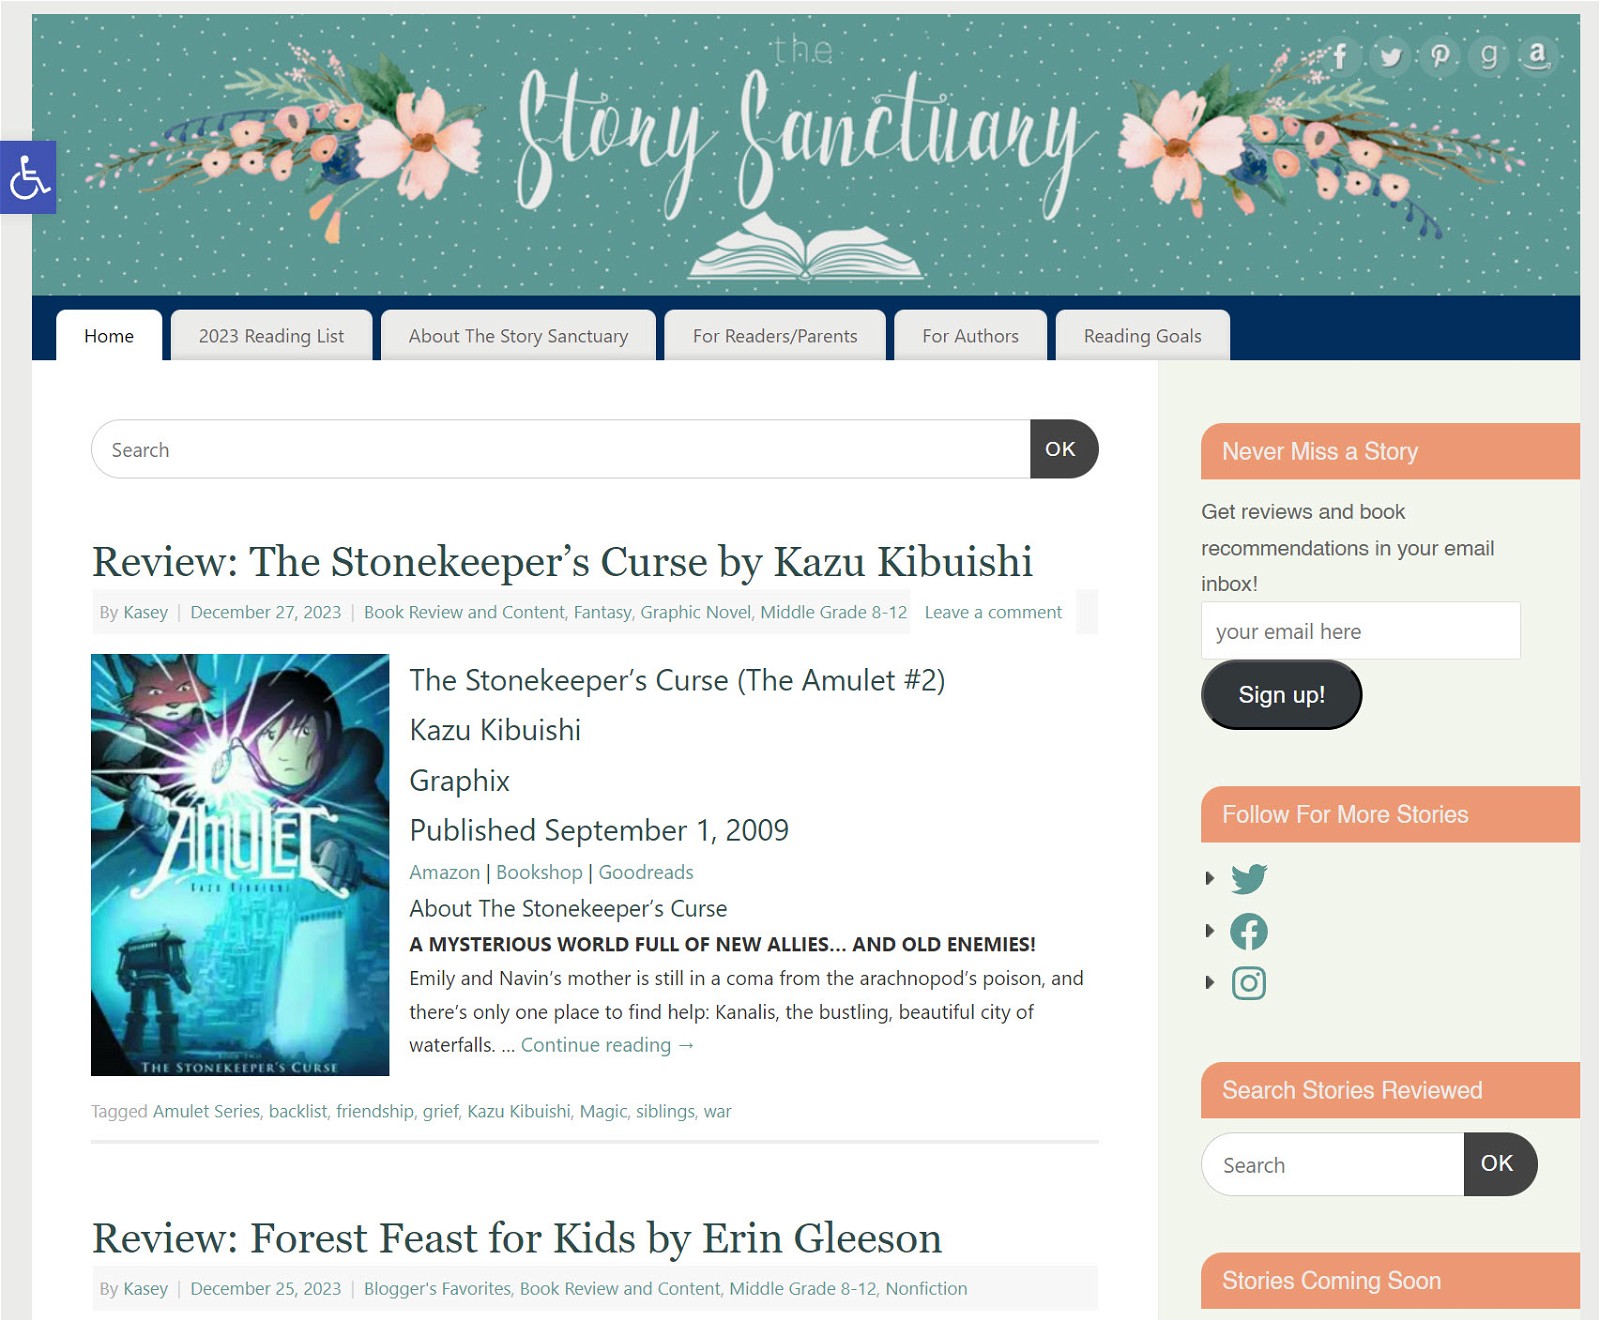 The Story Sanctuary homepage